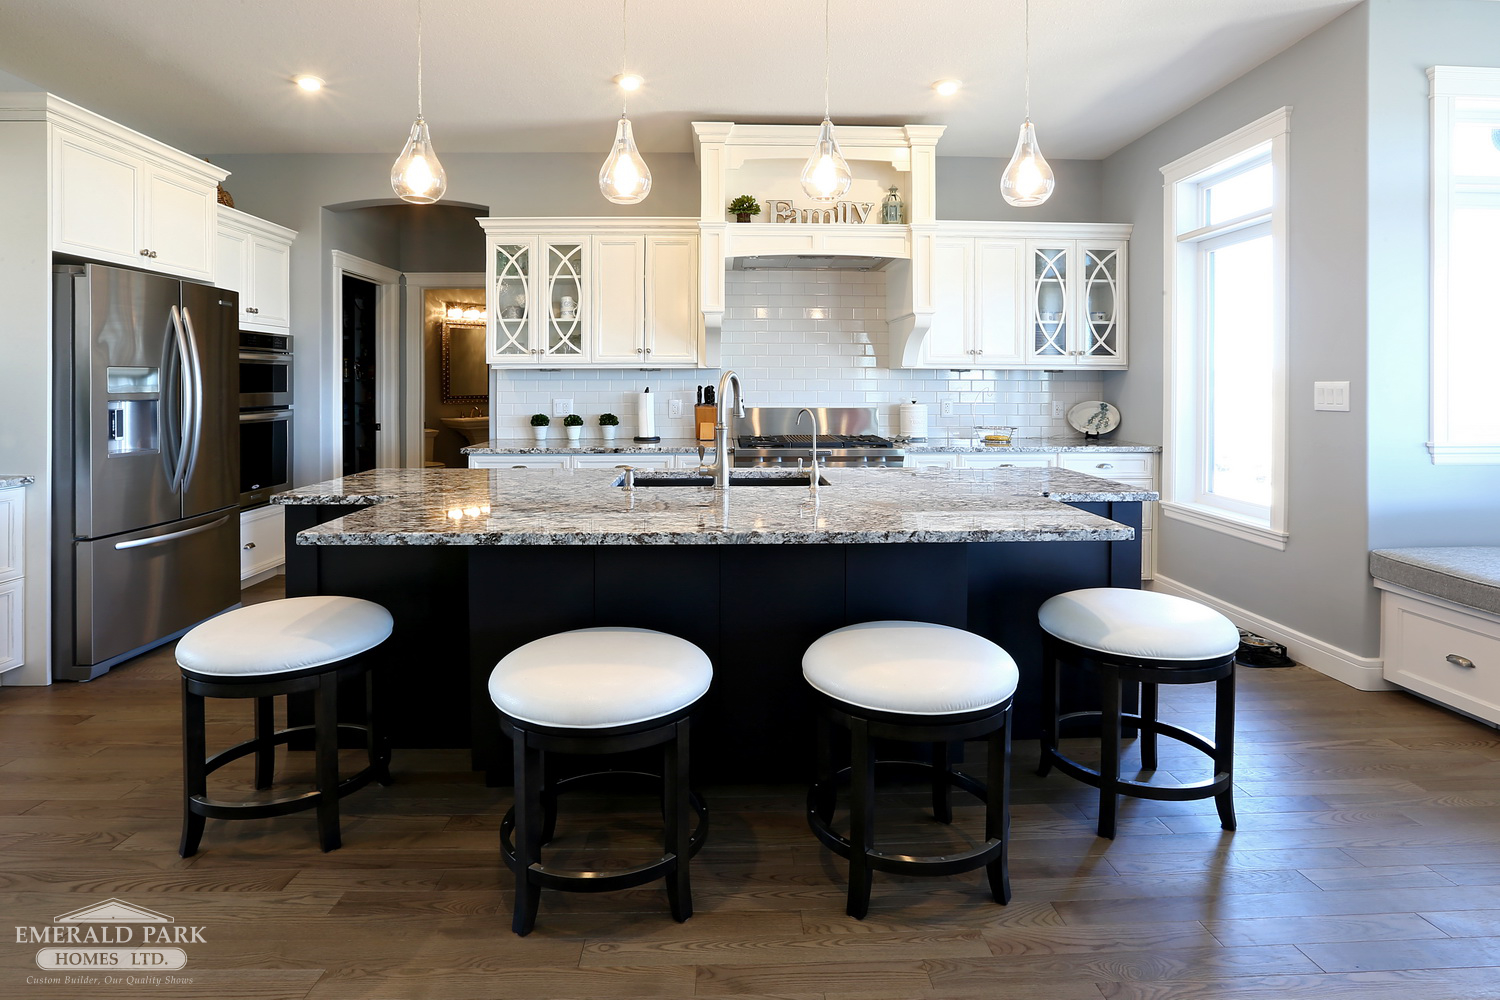 Emerald Park Homes Custom Designed New Holmes Approved Home Regina YQR large kitchen island with white bar stools white cabinets